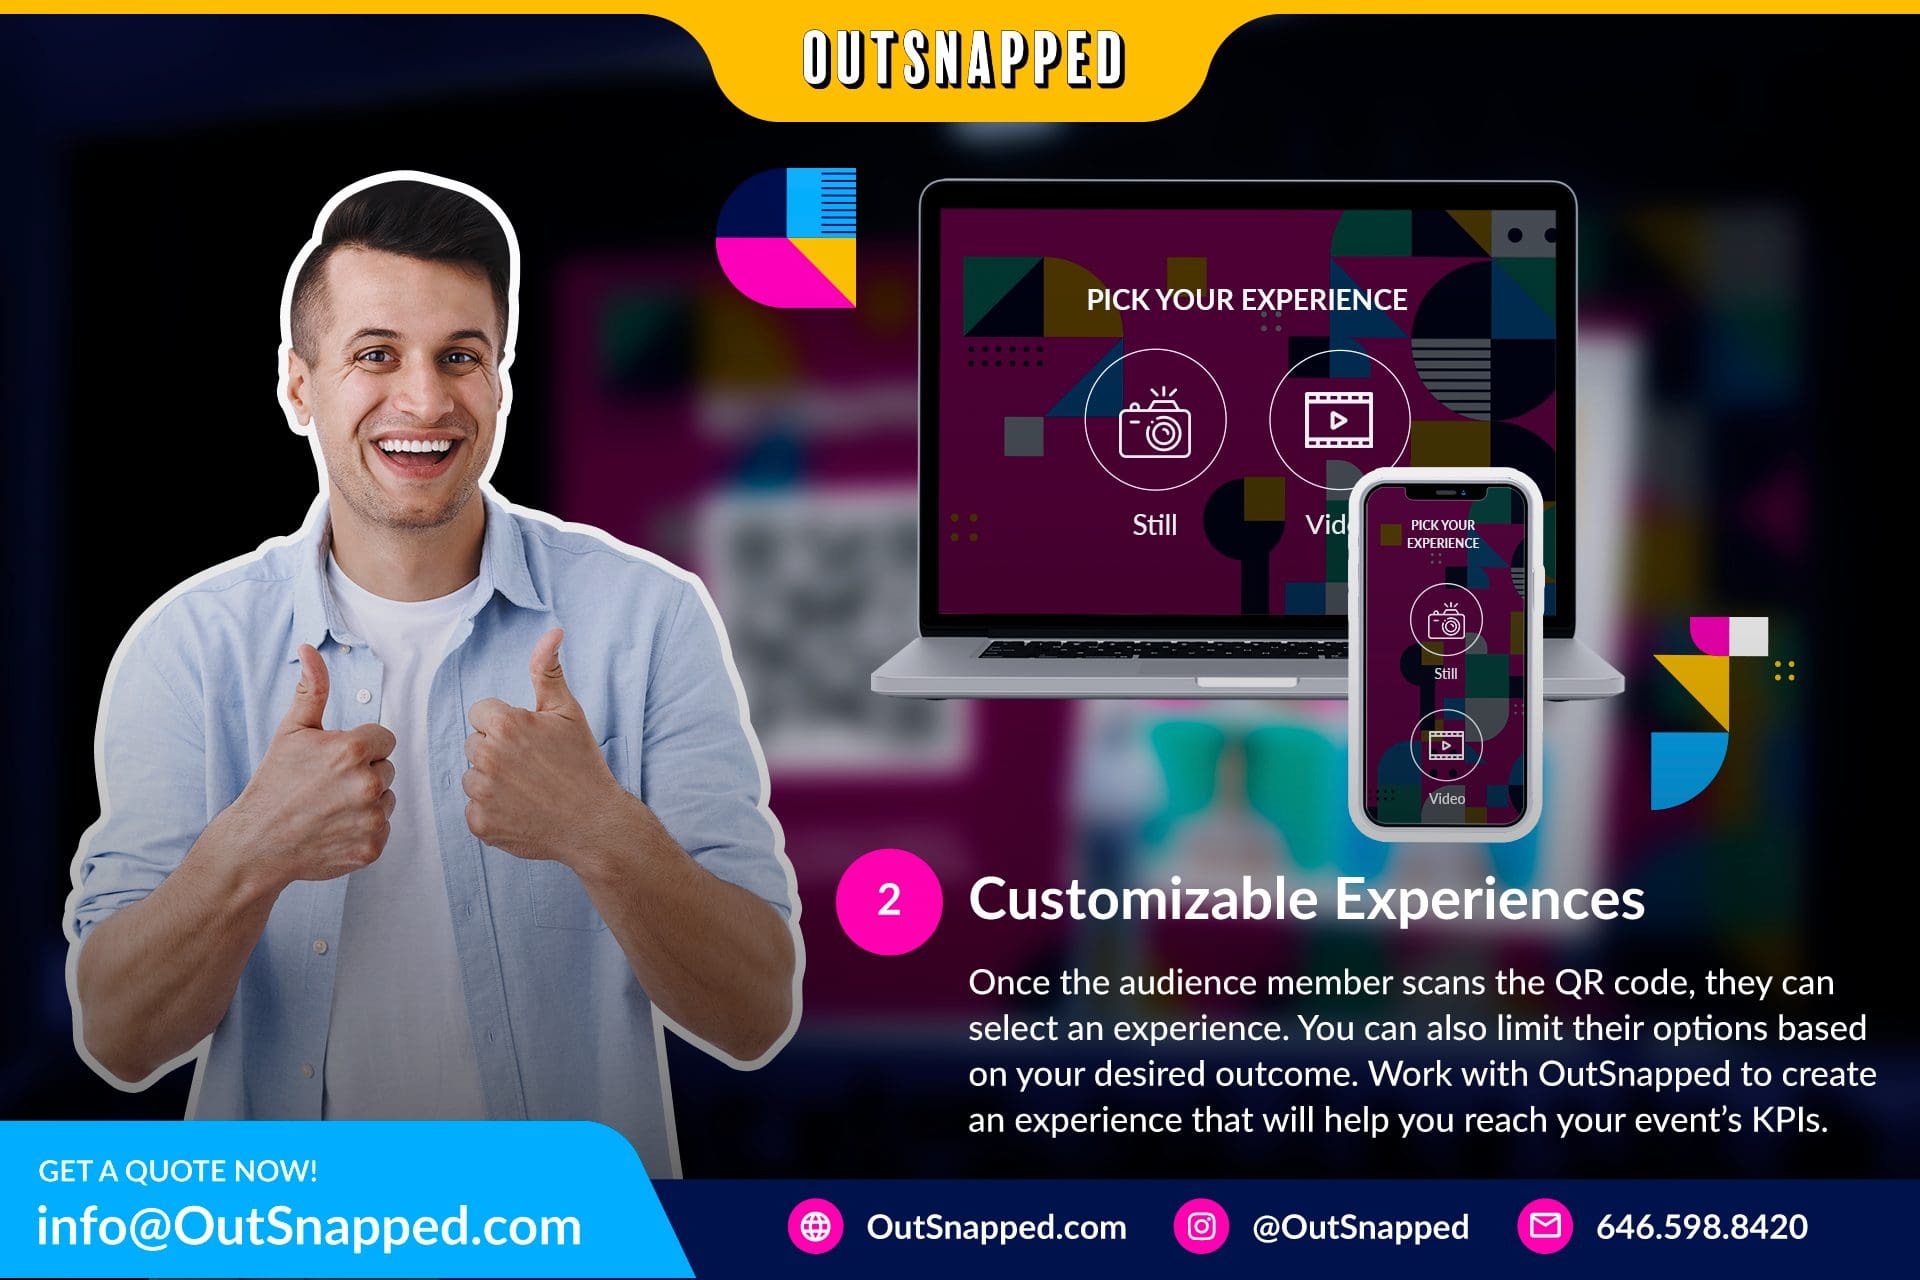 2 customizable experiences once the audience member scans the qr code, they can select an experience. You can also limit their options based on your desired outcome. Work with outsnapped to create an experience that will help you reach your event’s kpis.